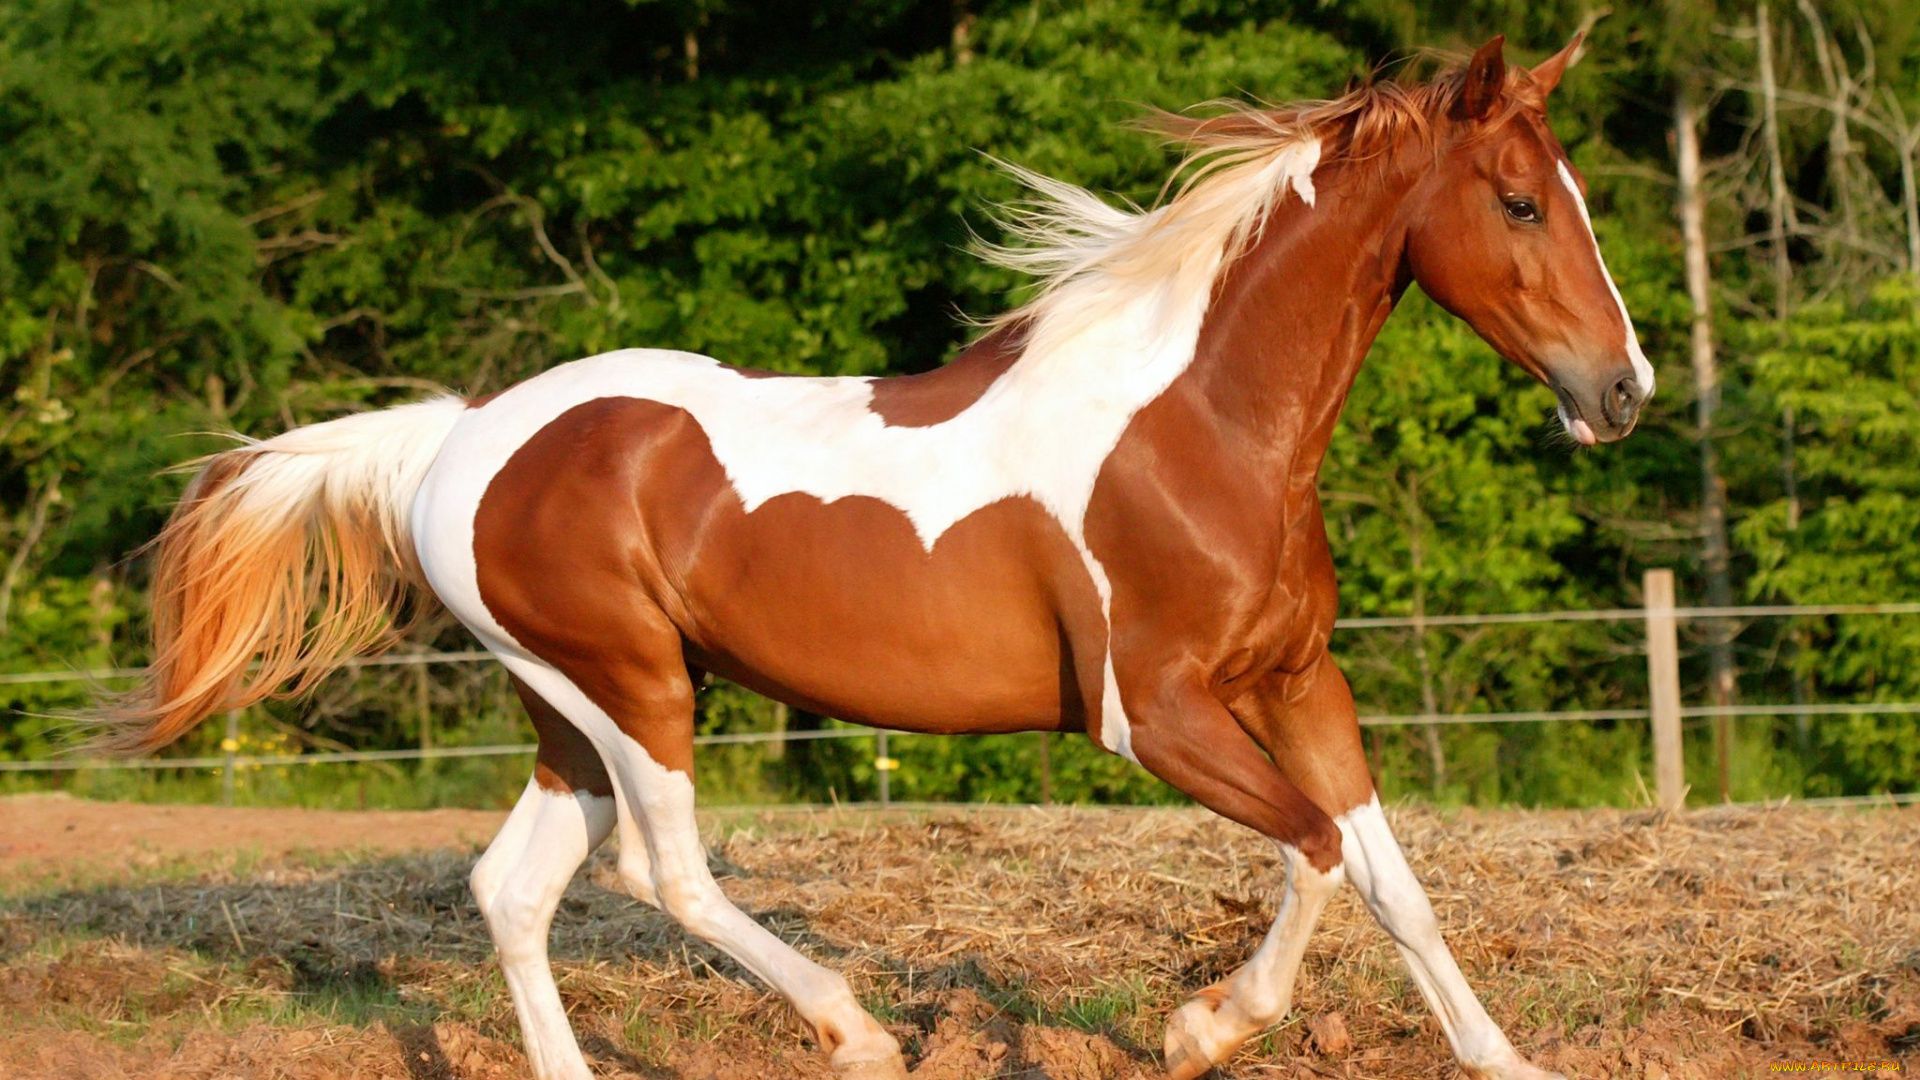 Pictures Of Horses With Their Breed